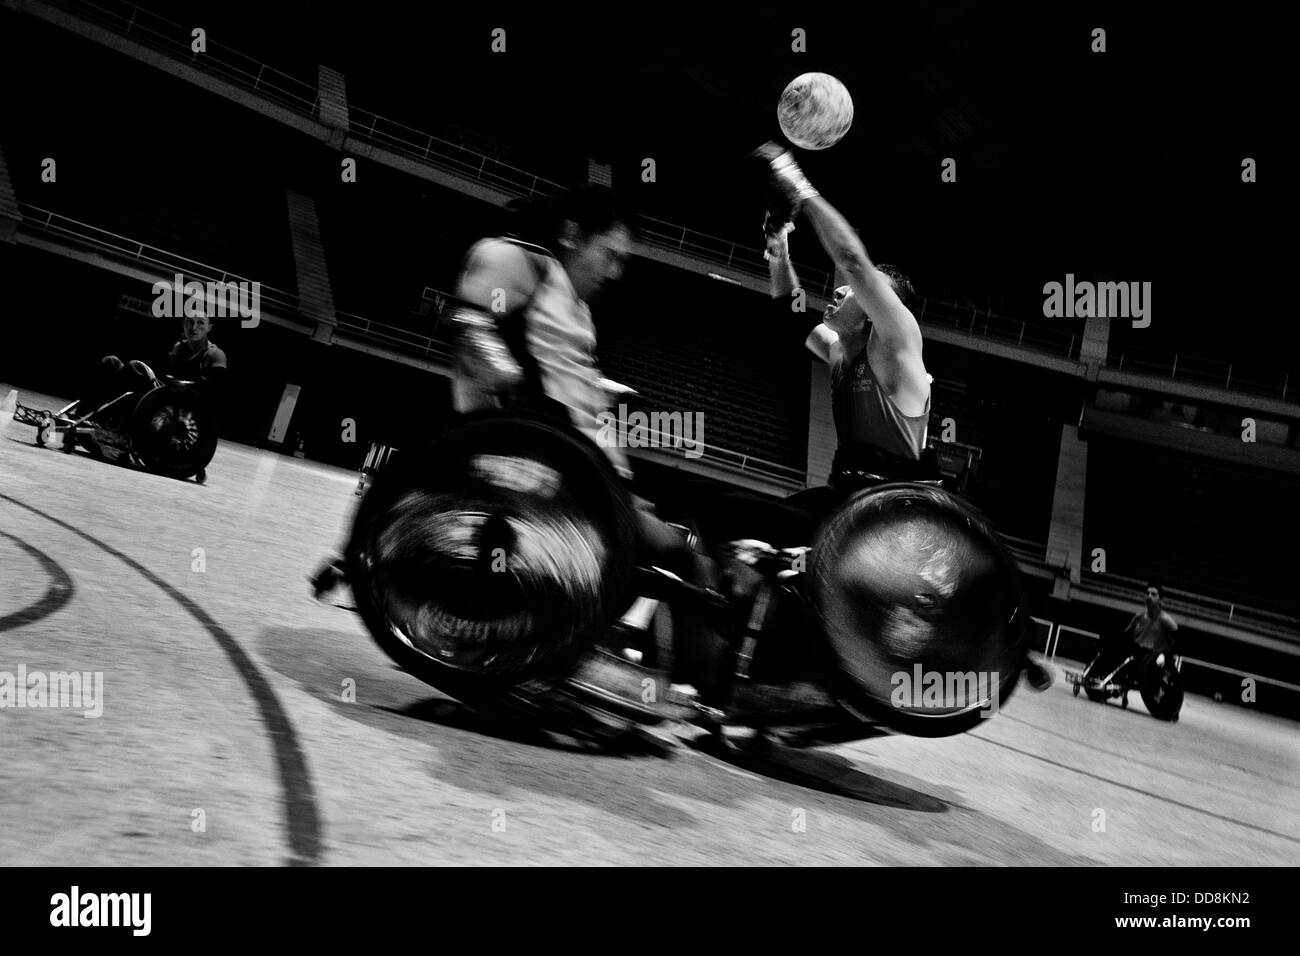 Moises Alonso crashes into Cristian Amaya during a wheelchair rugby training match at the arena in Bogota, Colombia. Stock Photo